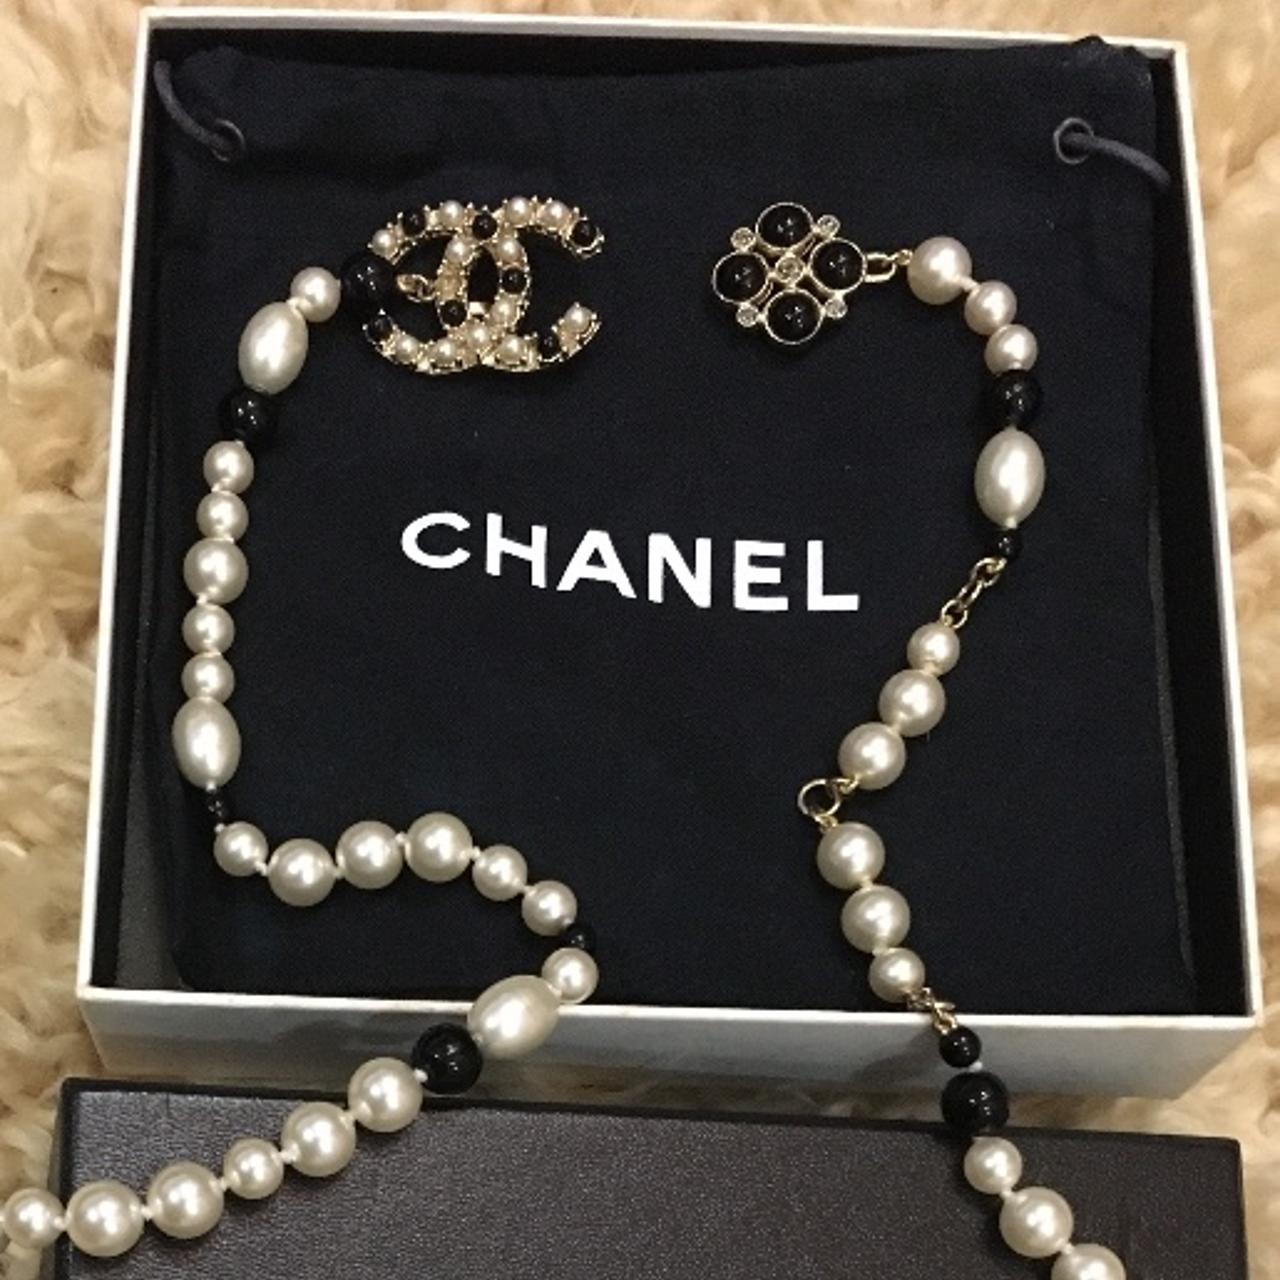 Authentic chanel belt/ necklace. Comes with box and